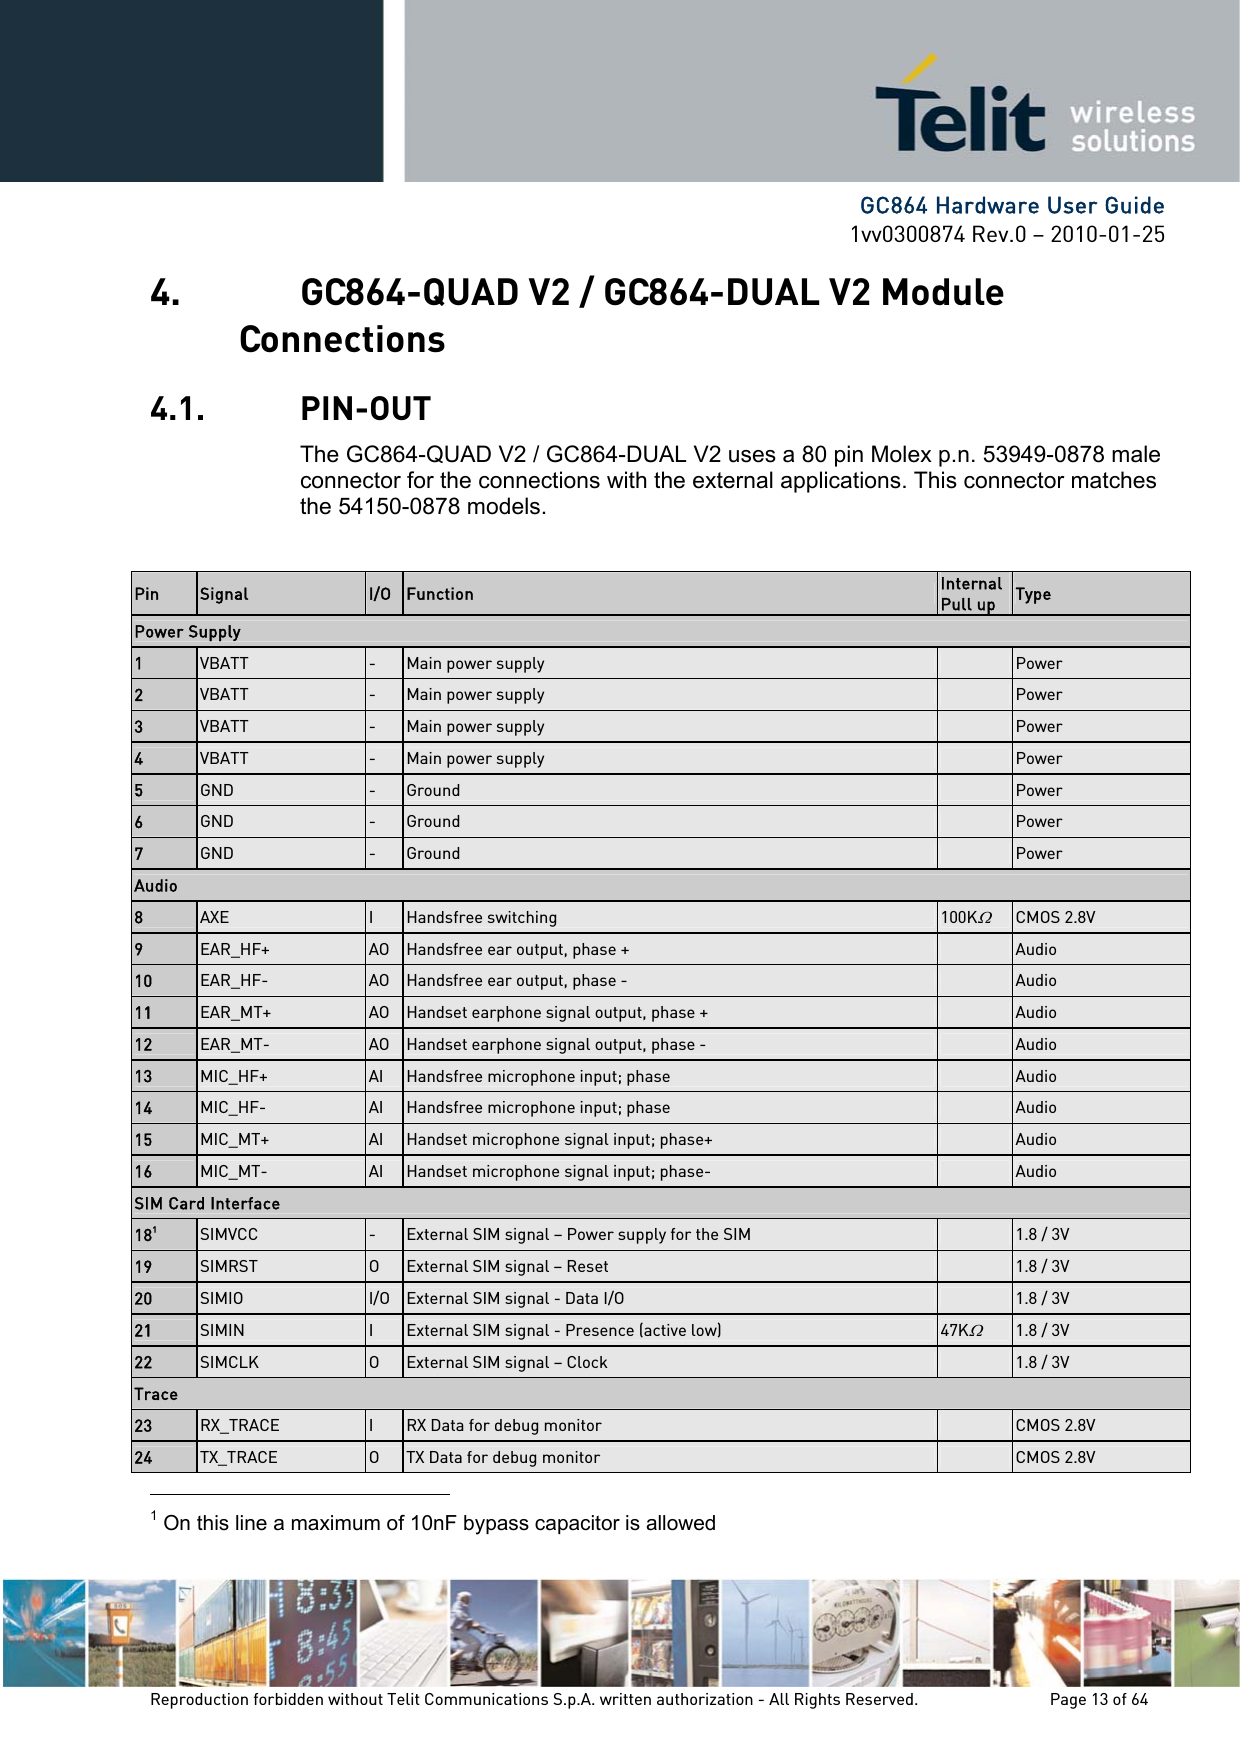      GC864 Hardware User Guide 1vv0300874 Rev.0 – 2010-01-25 Reproduction forbidden without Telit Communications S.p.A. written authorization - All Rights Reserved.    Page 13 of 64  4. GC864-QUAD V2 / GC864-DUAL V2 Module Connections 4.1. PIN-OUT The GC864-QUAD V2 / GC864-DUAL V2 uses a 80 pin Molex p.n. 53949-0878 male connector for the connections with the external applications. This connector matches the 54150-0878 models.  Pin  Signal  I/O  Function  Internal Pull up  Type Power Supply 1  VBATT  -  Main power supply   Power 2  VBATT  -  Main power supply   Power 3  VBATT  -  Main power supply   Power 4  VBATT  -  Main power supply   Power 5  GND  -  Ground   Power 6  GND  -  Ground   Power 7  GND  -  Ground   Power Audio 8  AXE  I  Handsfree switching  100KΩ CMOS 2.8V 9  EAR_HF+  AO  Handsfree ear output, phase +   Audio 10  EAR_HF-  AO  Handsfree ear output, phase -   Audio 11  EAR_MT+  AO  Handset earphone signal output, phase +   Audio 12  EAR_MT-  AO  Handset earphone signal output, phase -   Audio 13  MIC_HF+  AI  Handsfree microphone input; phase   Audio 14  MIC_HF-  AI  Handsfree microphone input; phase   Audio 15  MIC_MT+  AI  Handset microphone signal input; phase+   Audio 16  MIC_MT-  AI  Handset microphone signal input; phase-   Audio SIM Card Interface 181 SIMVCC  -  External SIM signal – Power supply for the SIM   1.8 / 3V 19  SIMRST  O  External SIM signal – Reset   1.8 / 3V 20  SIMIO  I/O  External SIM signal - Data I/O   1.8 / 3V 21  SIMIN  I  External SIM signal - Presence (active low)  47KΩ 1.8 / 3V 22  SIMCLK  O  External SIM signal – Clock   1.8 / 3V Trace 23  RX_TRACE  I  RX Data for debug monitor   CMOS 2.8V 24  TX_TRACE  O  TX Data for debug monitor   CMOS 2.8V                                                       1 On this line a maximum of 10nF bypass capacitor is allowed 